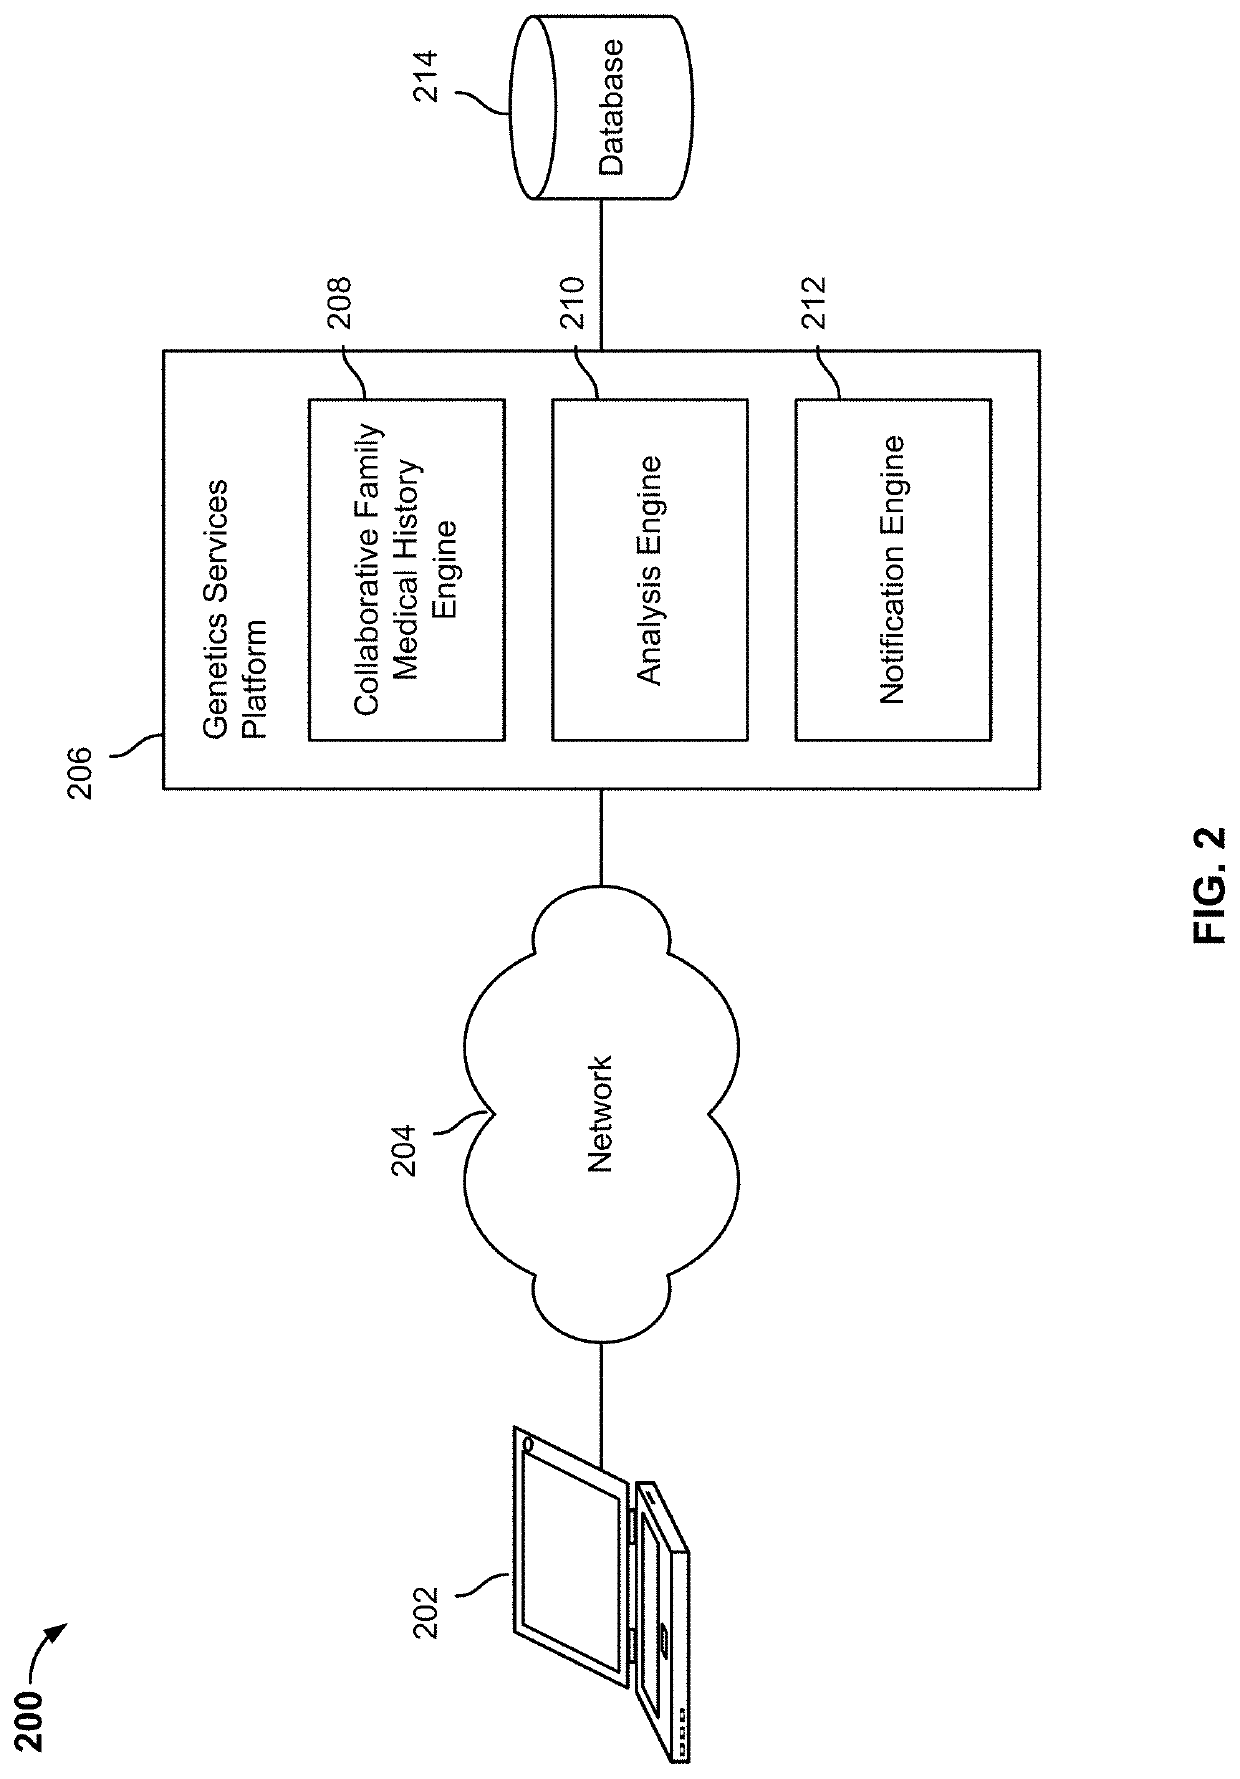 Method for analyzing and displaying genetic information between family members